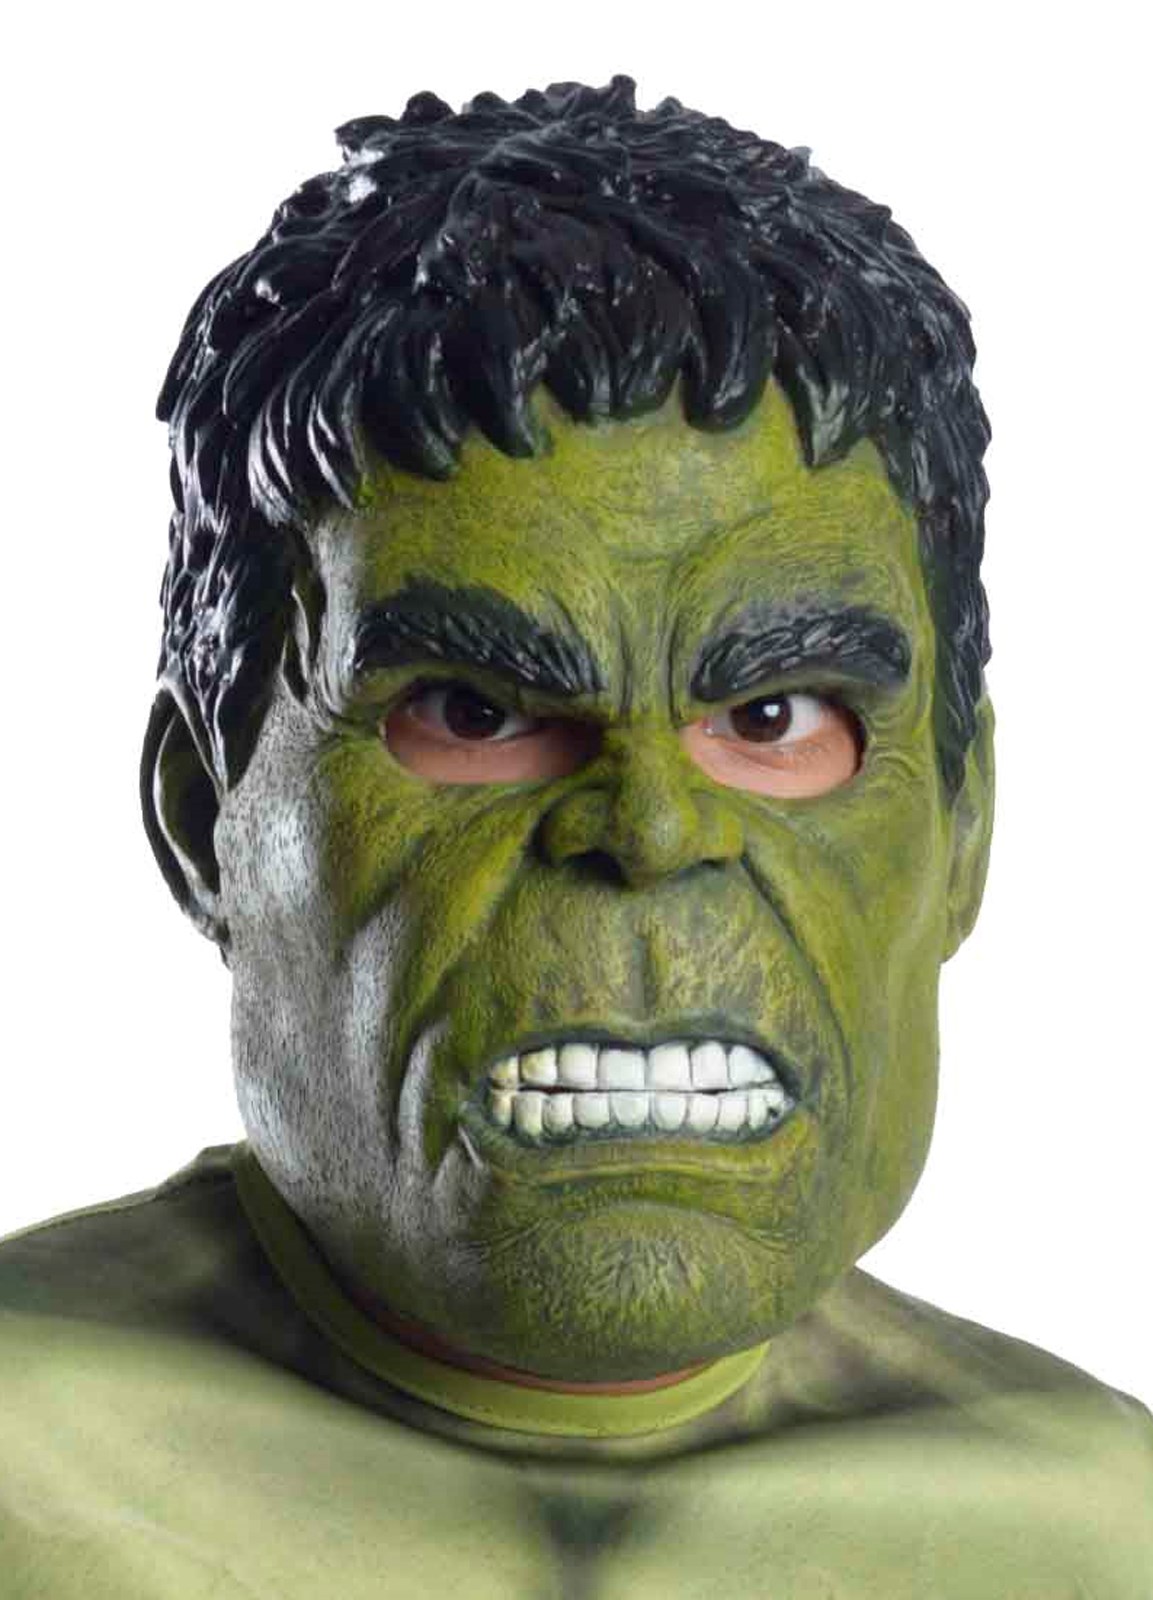 Avengers 2 - Age of Ultron: The Hulk 3/4 Mask For Kids